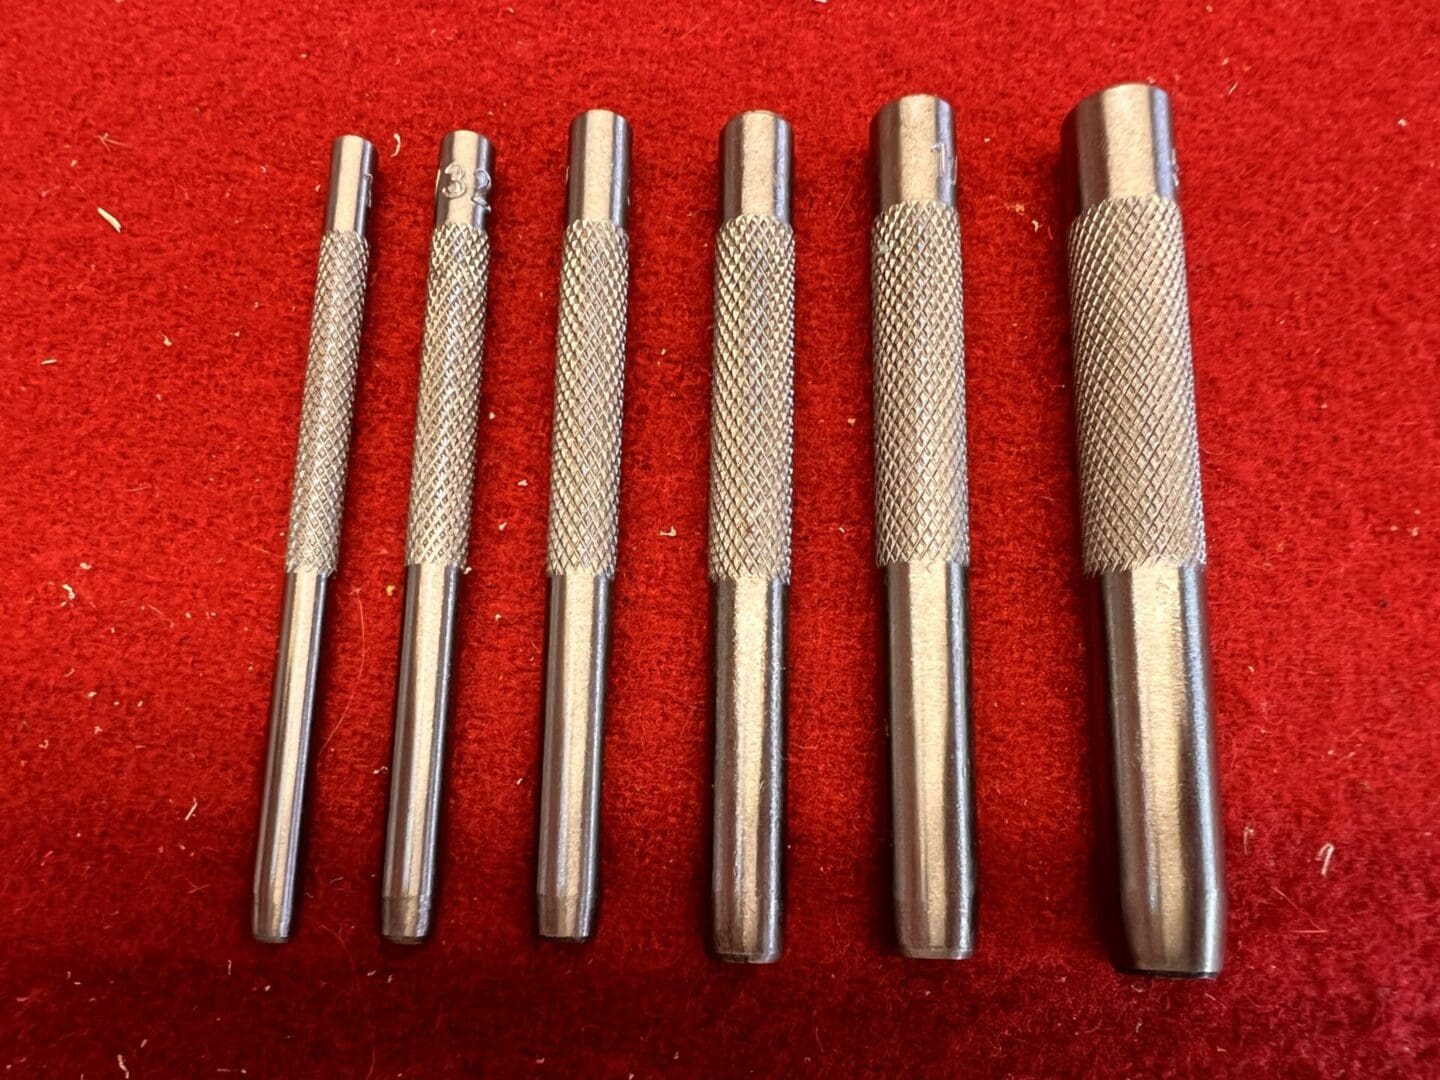 6pc Hollow Metal Leather Punch Set Punches L3-101 - Kentucky